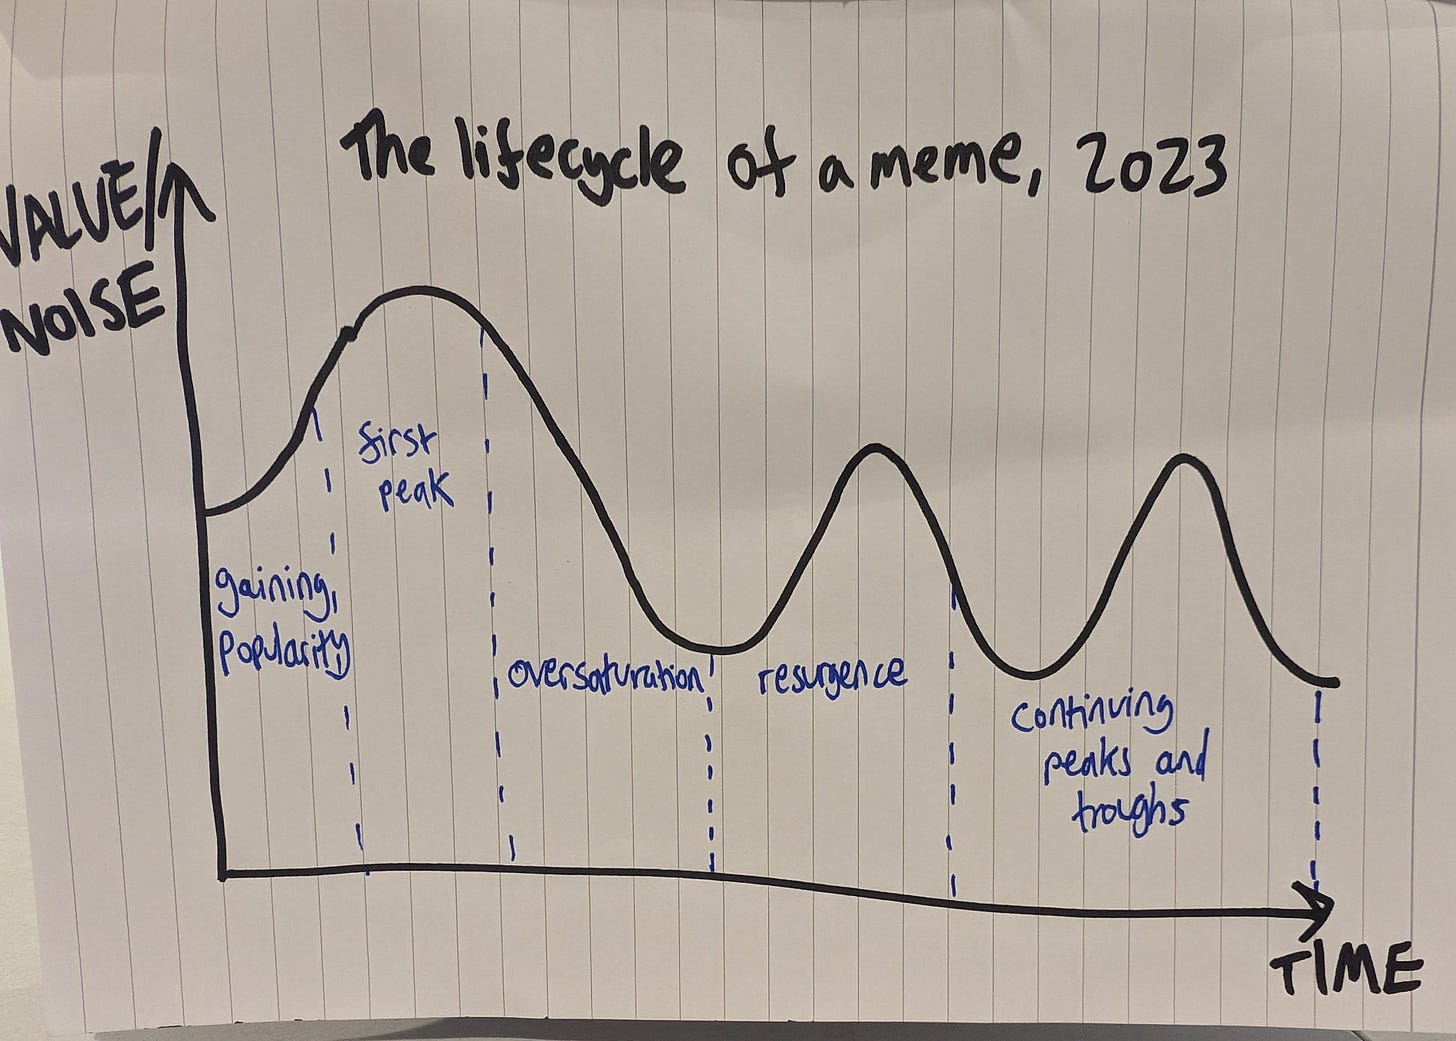 A hand-drawn graph on lined paper titled 'The lifecycle of a meme, 2023'. The graph has 'TIME' on the x-axis and 'VALUE/NOISE' on the y-axis. It depicts a fluctuating line with several peaks and troughs. Marked phases on the graph include 'gaining popularity' leading to a 'first peak', followed by 'oversaturation', then a 'resurgence', and finally 'continuing peaks and troughs', indicating the variable attention and relevance of a meme over time."